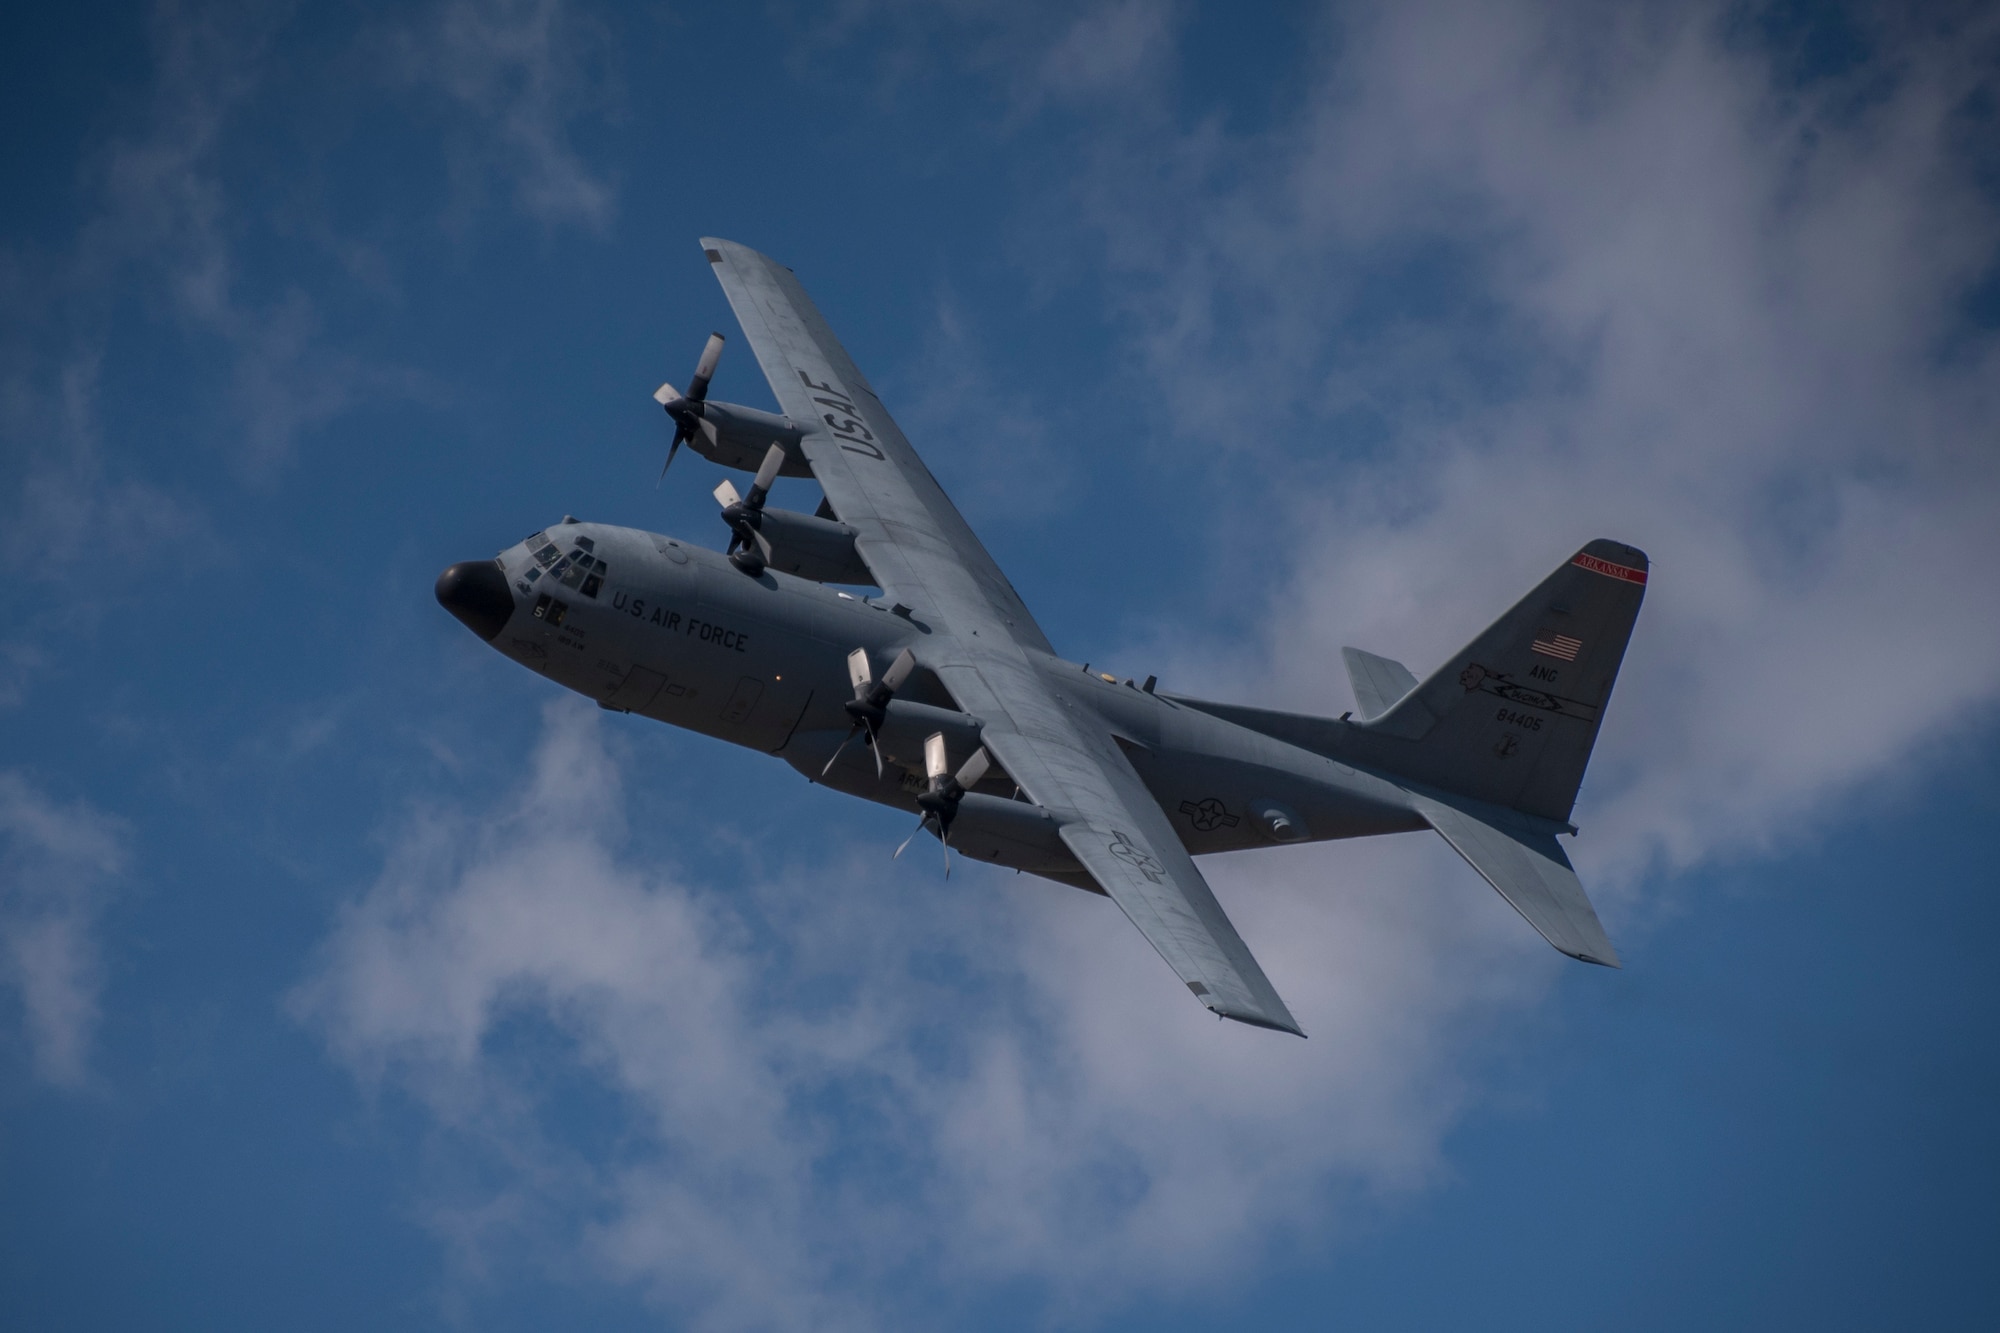 A photo of a C-130 flying against a blue sky.